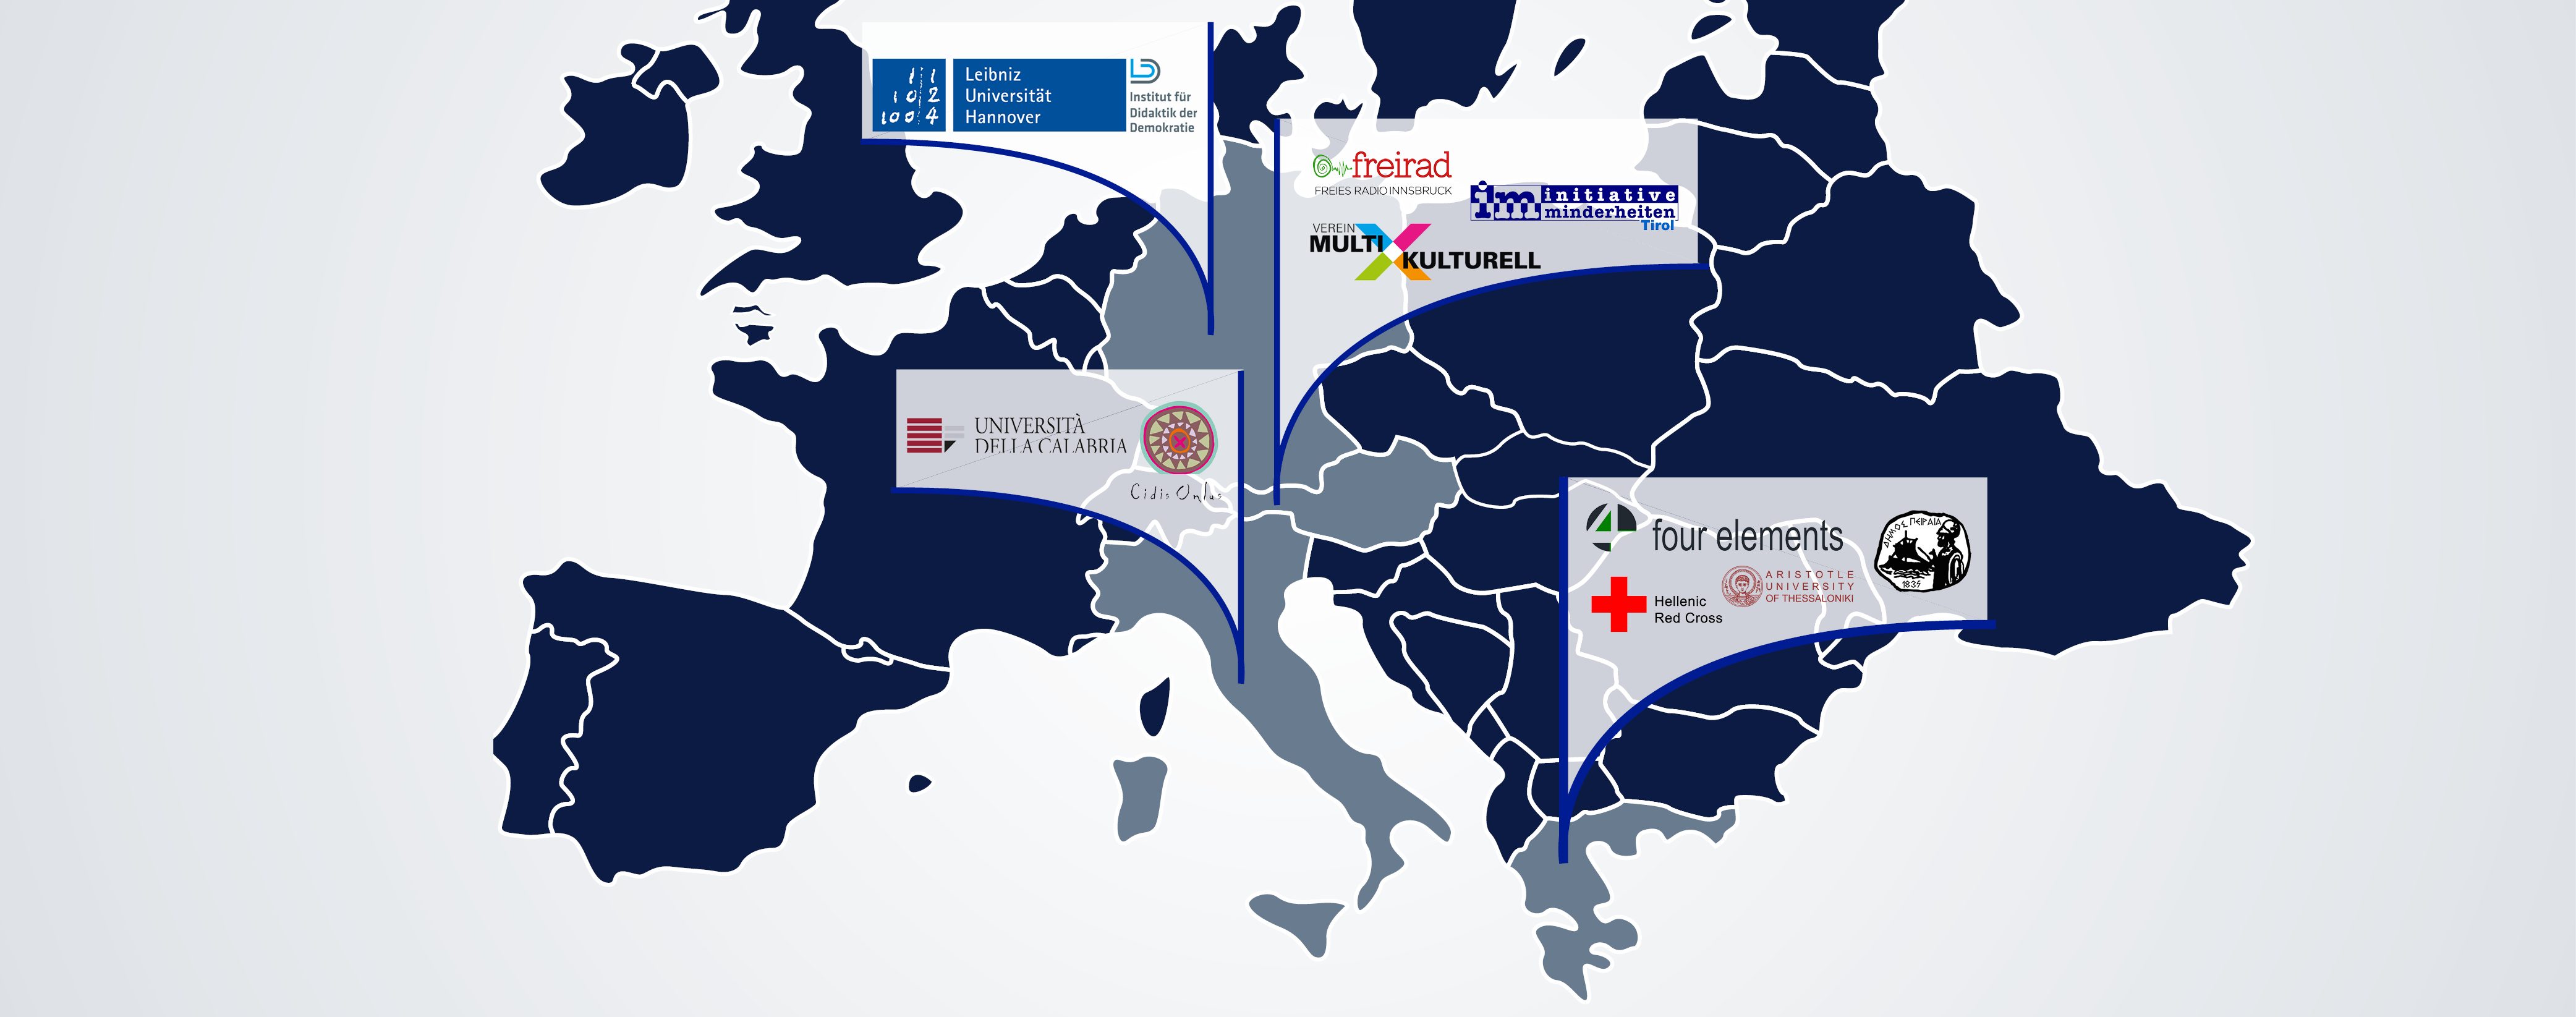 European map showing the logos of the partner organisations in their respective countries.